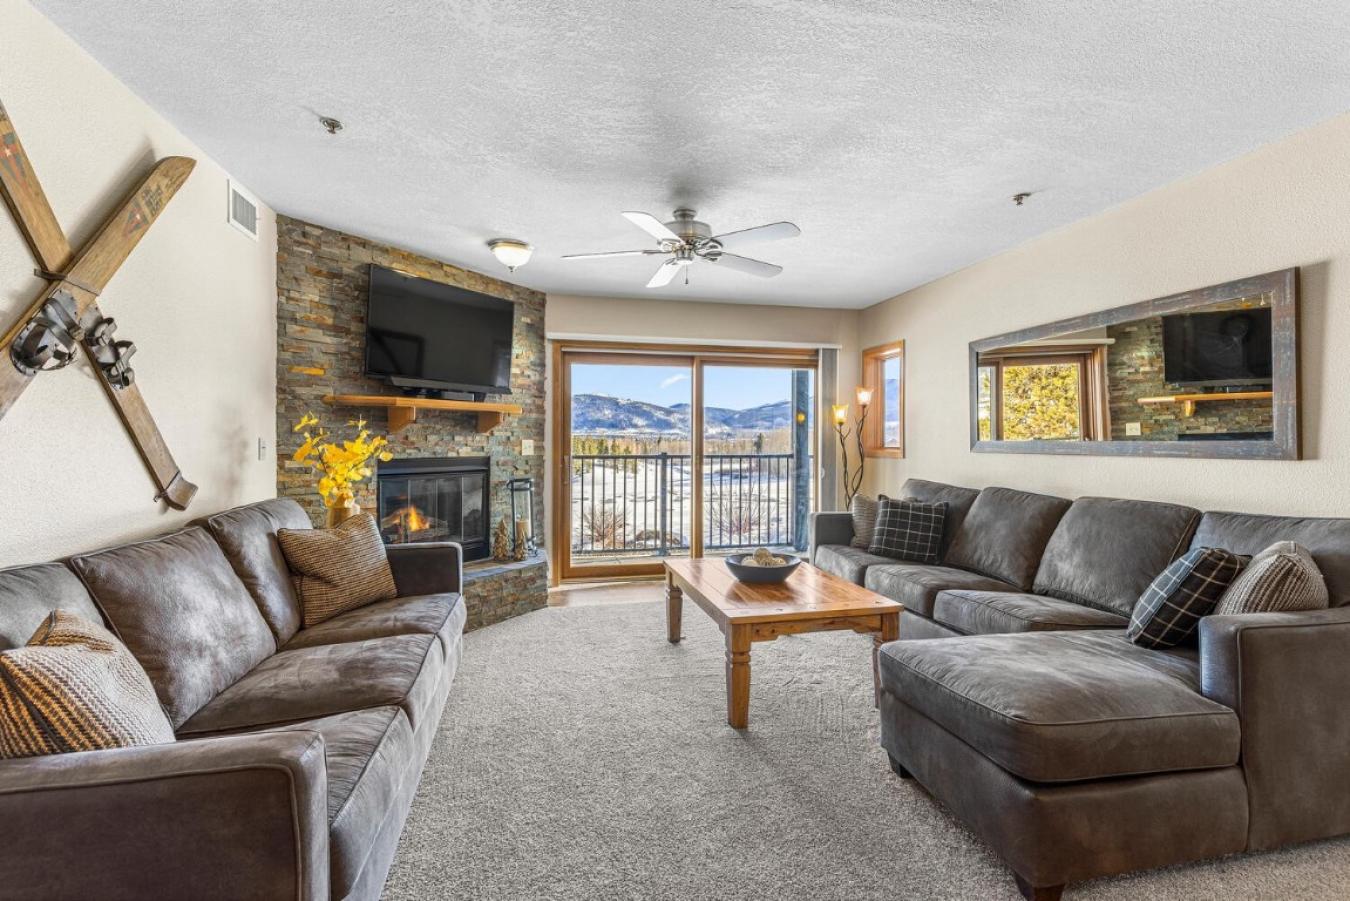 1630 Lakeview TERRACE 104C, FRISCO, Colorado, 80443, United States, 2 Bedrooms Bedrooms, ,2 BathroomsBathrooms,Residential,For Sale,1630 Lakeview TERRACE 104C,1216284